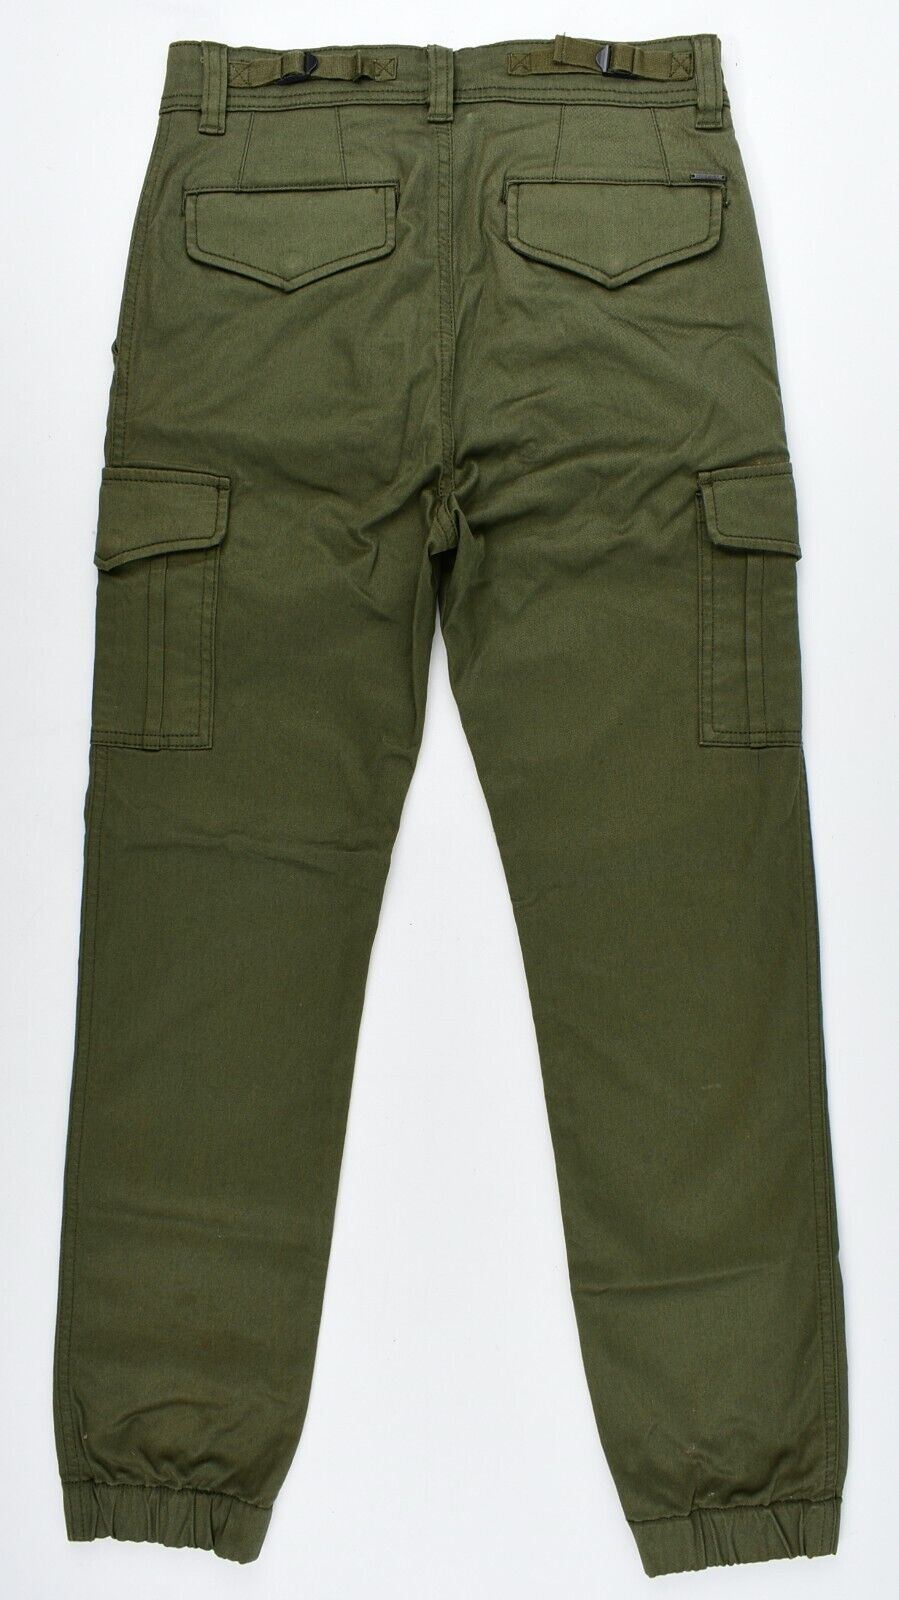 DIESEL CHI UNITED Mens Cuffed Leg Chino Trousers, Pants, Green, size W27